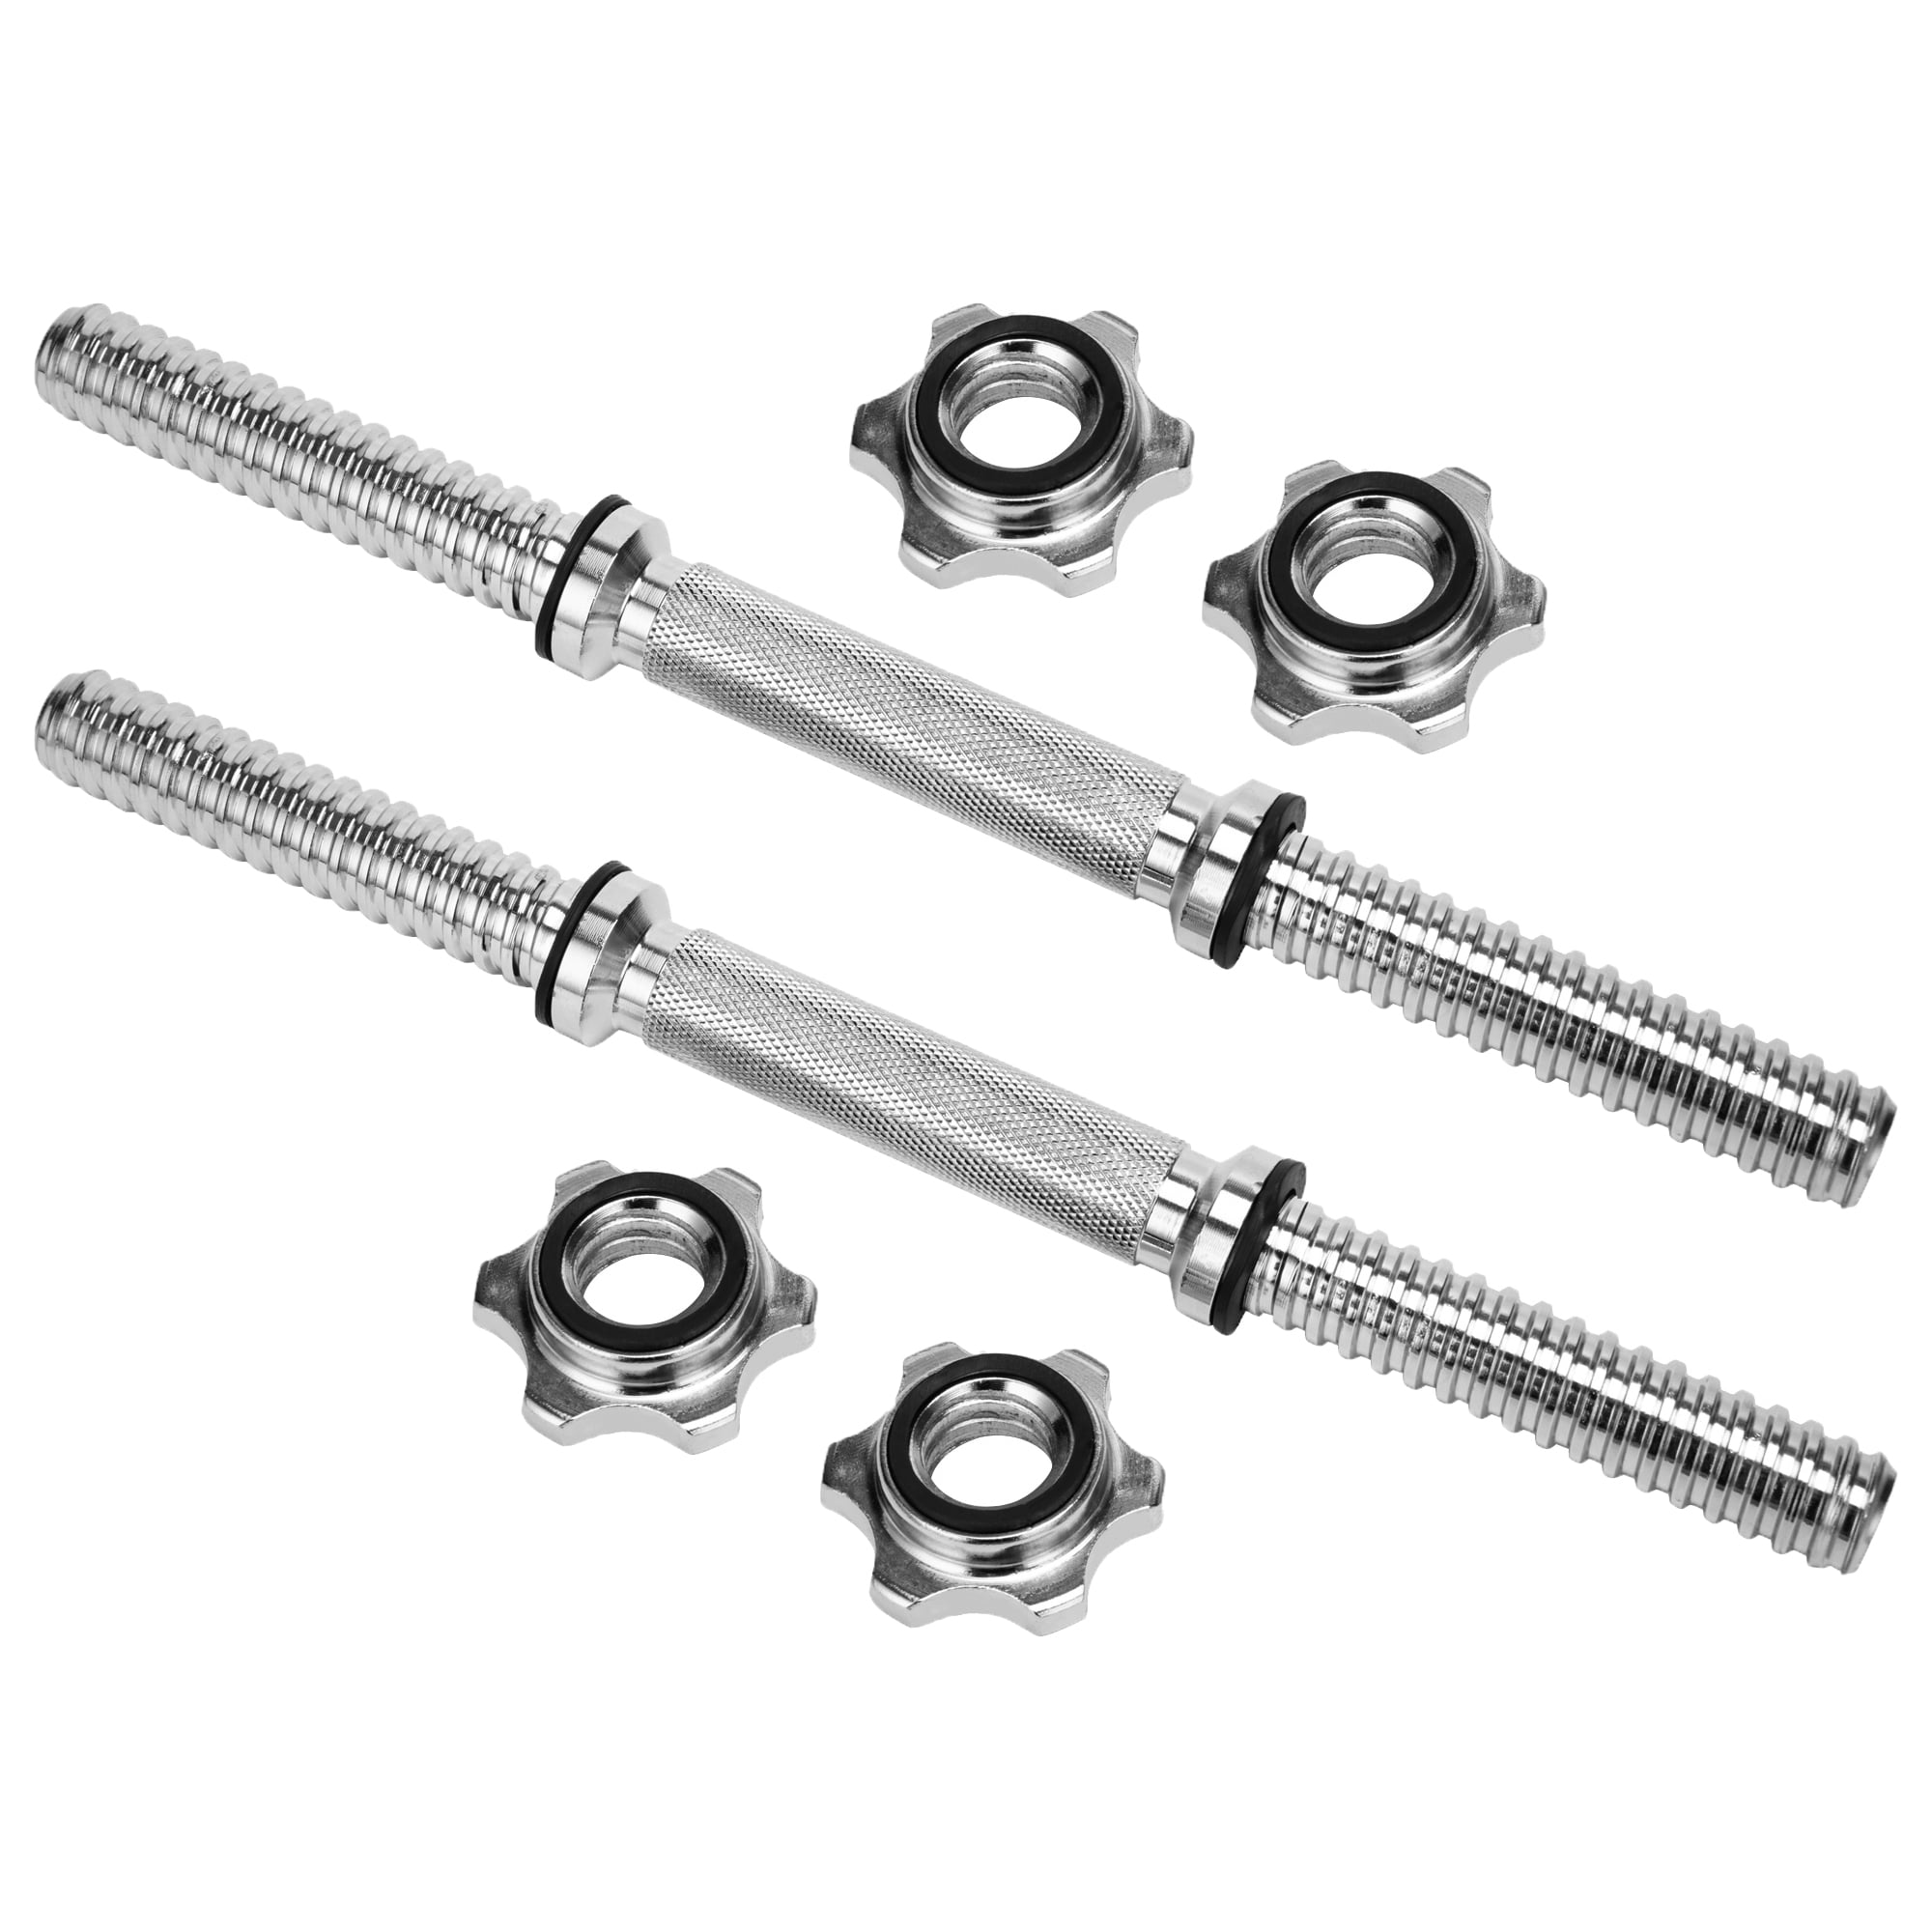 4x Weight Check Nut Barbell Bar Clips Spin Lock Screw Dumbbell Spinlock Collars 